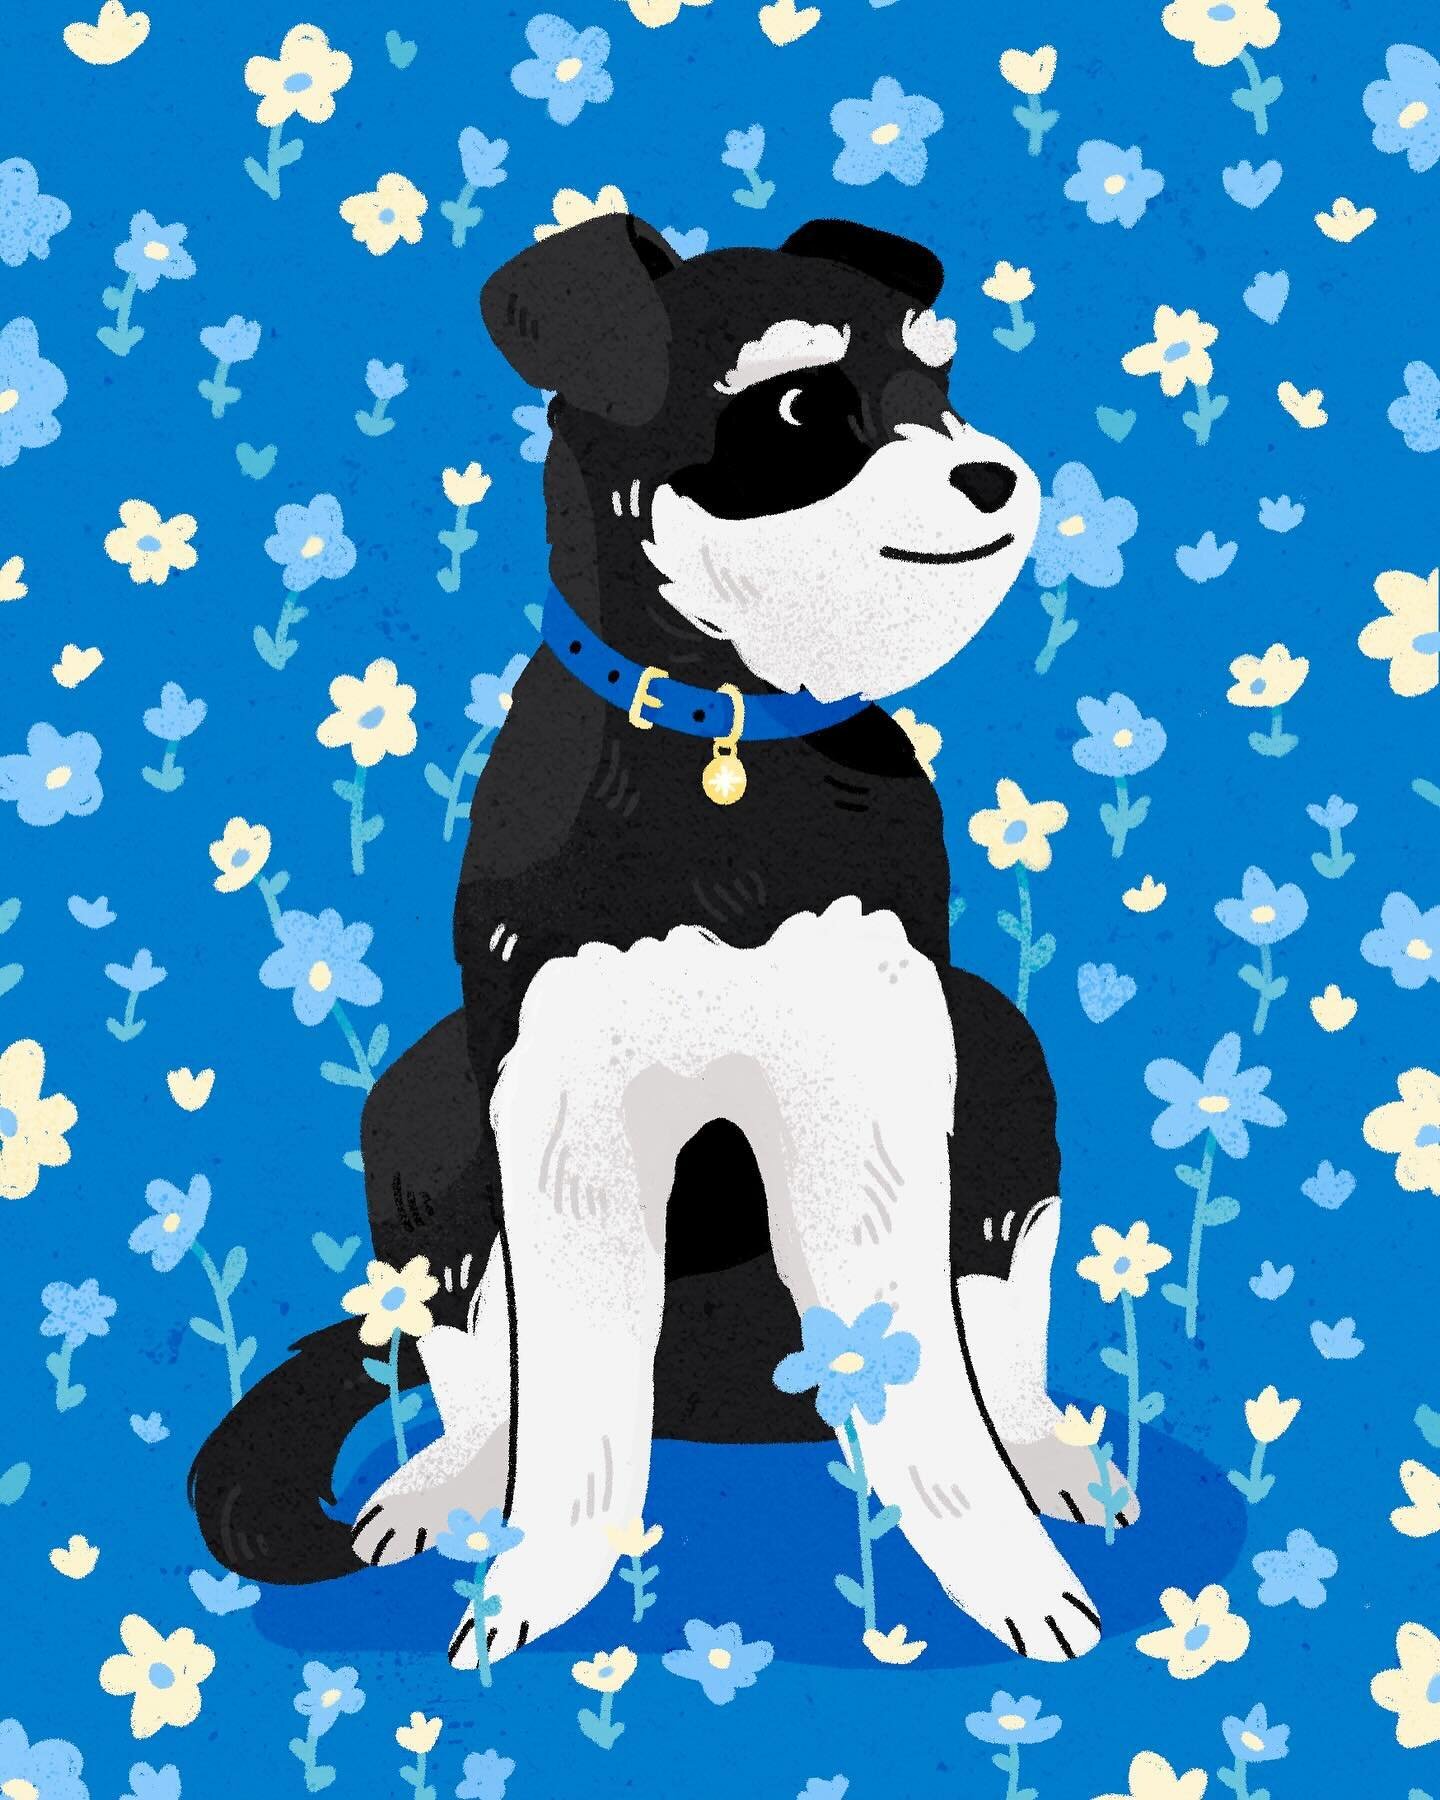 A quick portrait of my fur baby Snowy 🐶

Started with a plain blue background but it felt like it was missing something so I added a few flowers&hellip; which turned into a whole background of them one hour later - couldn&rsquo;t stop myself 🙃🌼 

